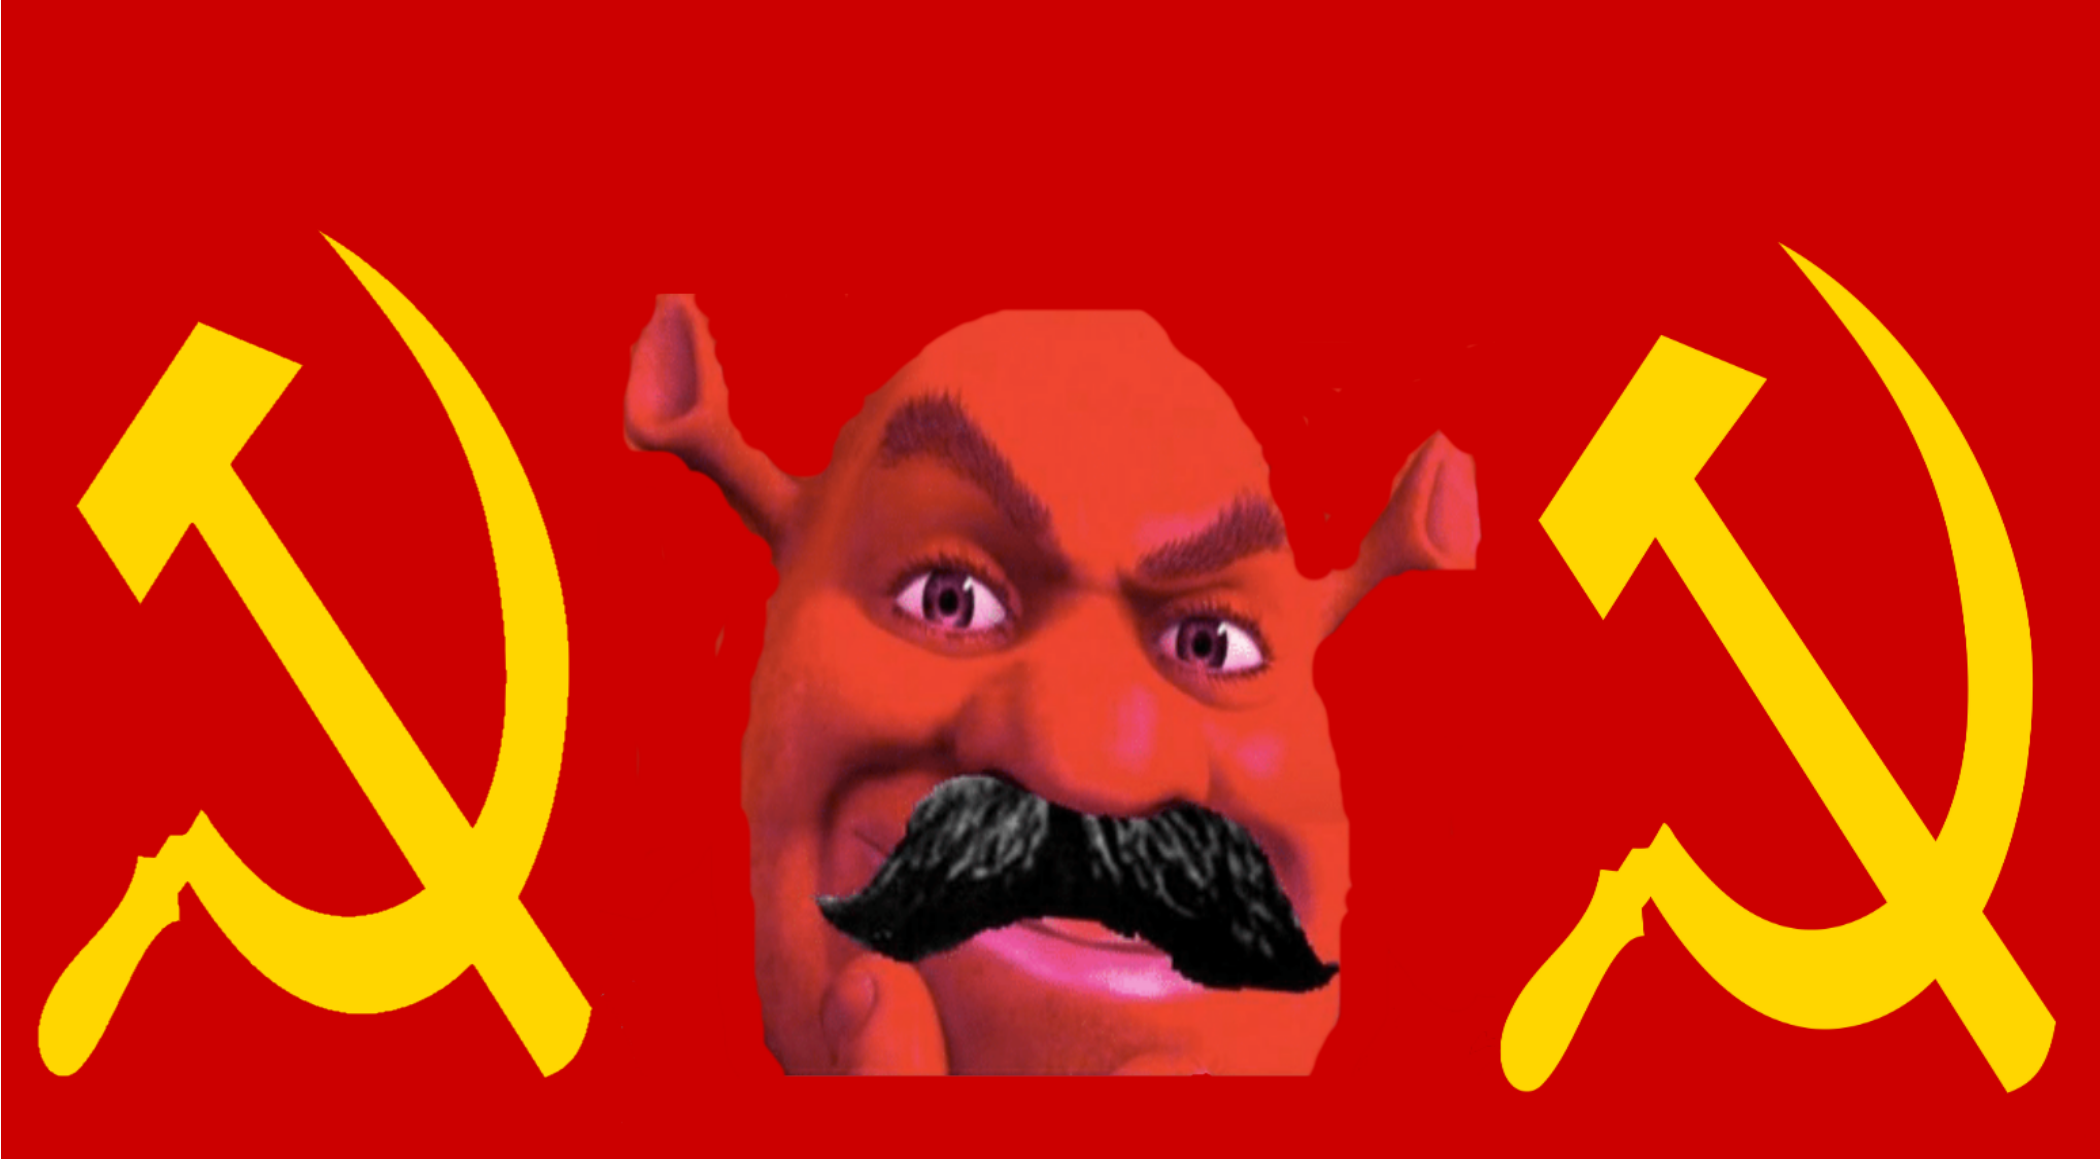 When you misspell the soviet union and instead say ''Soviet Onion